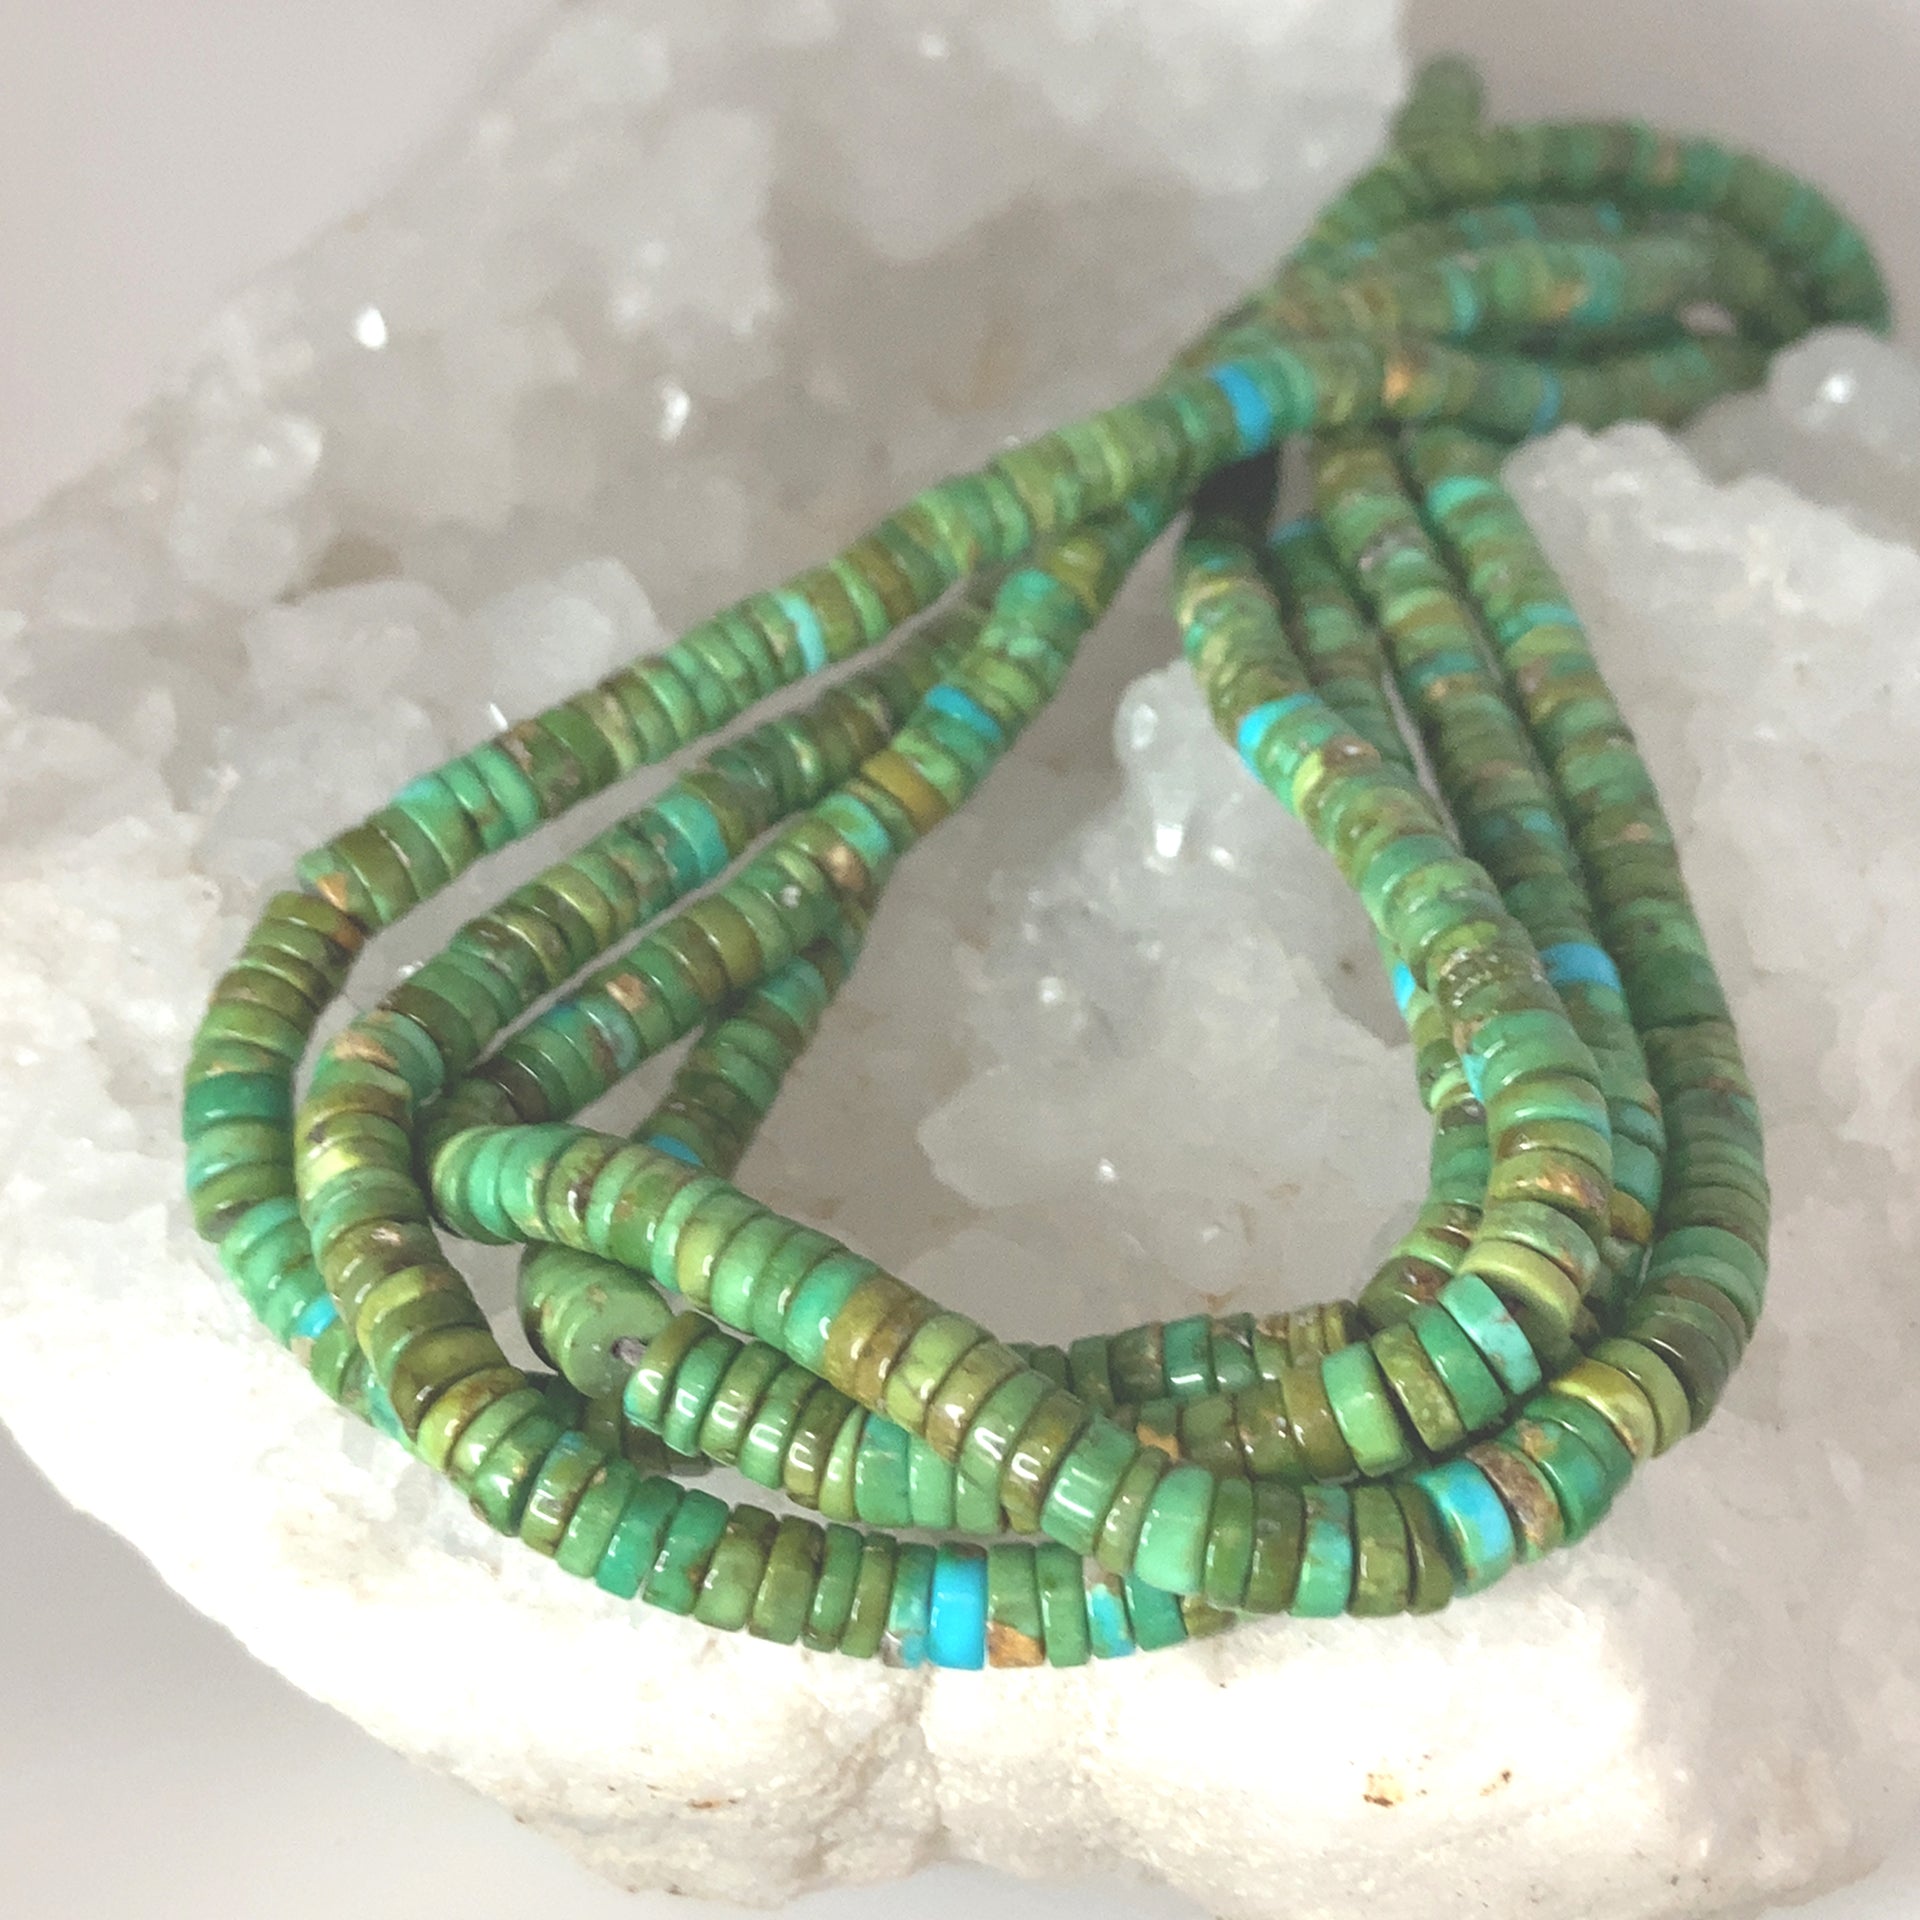 Sonoran Gold Turquoise Beads Lime Green 5.5mm Heshi 16